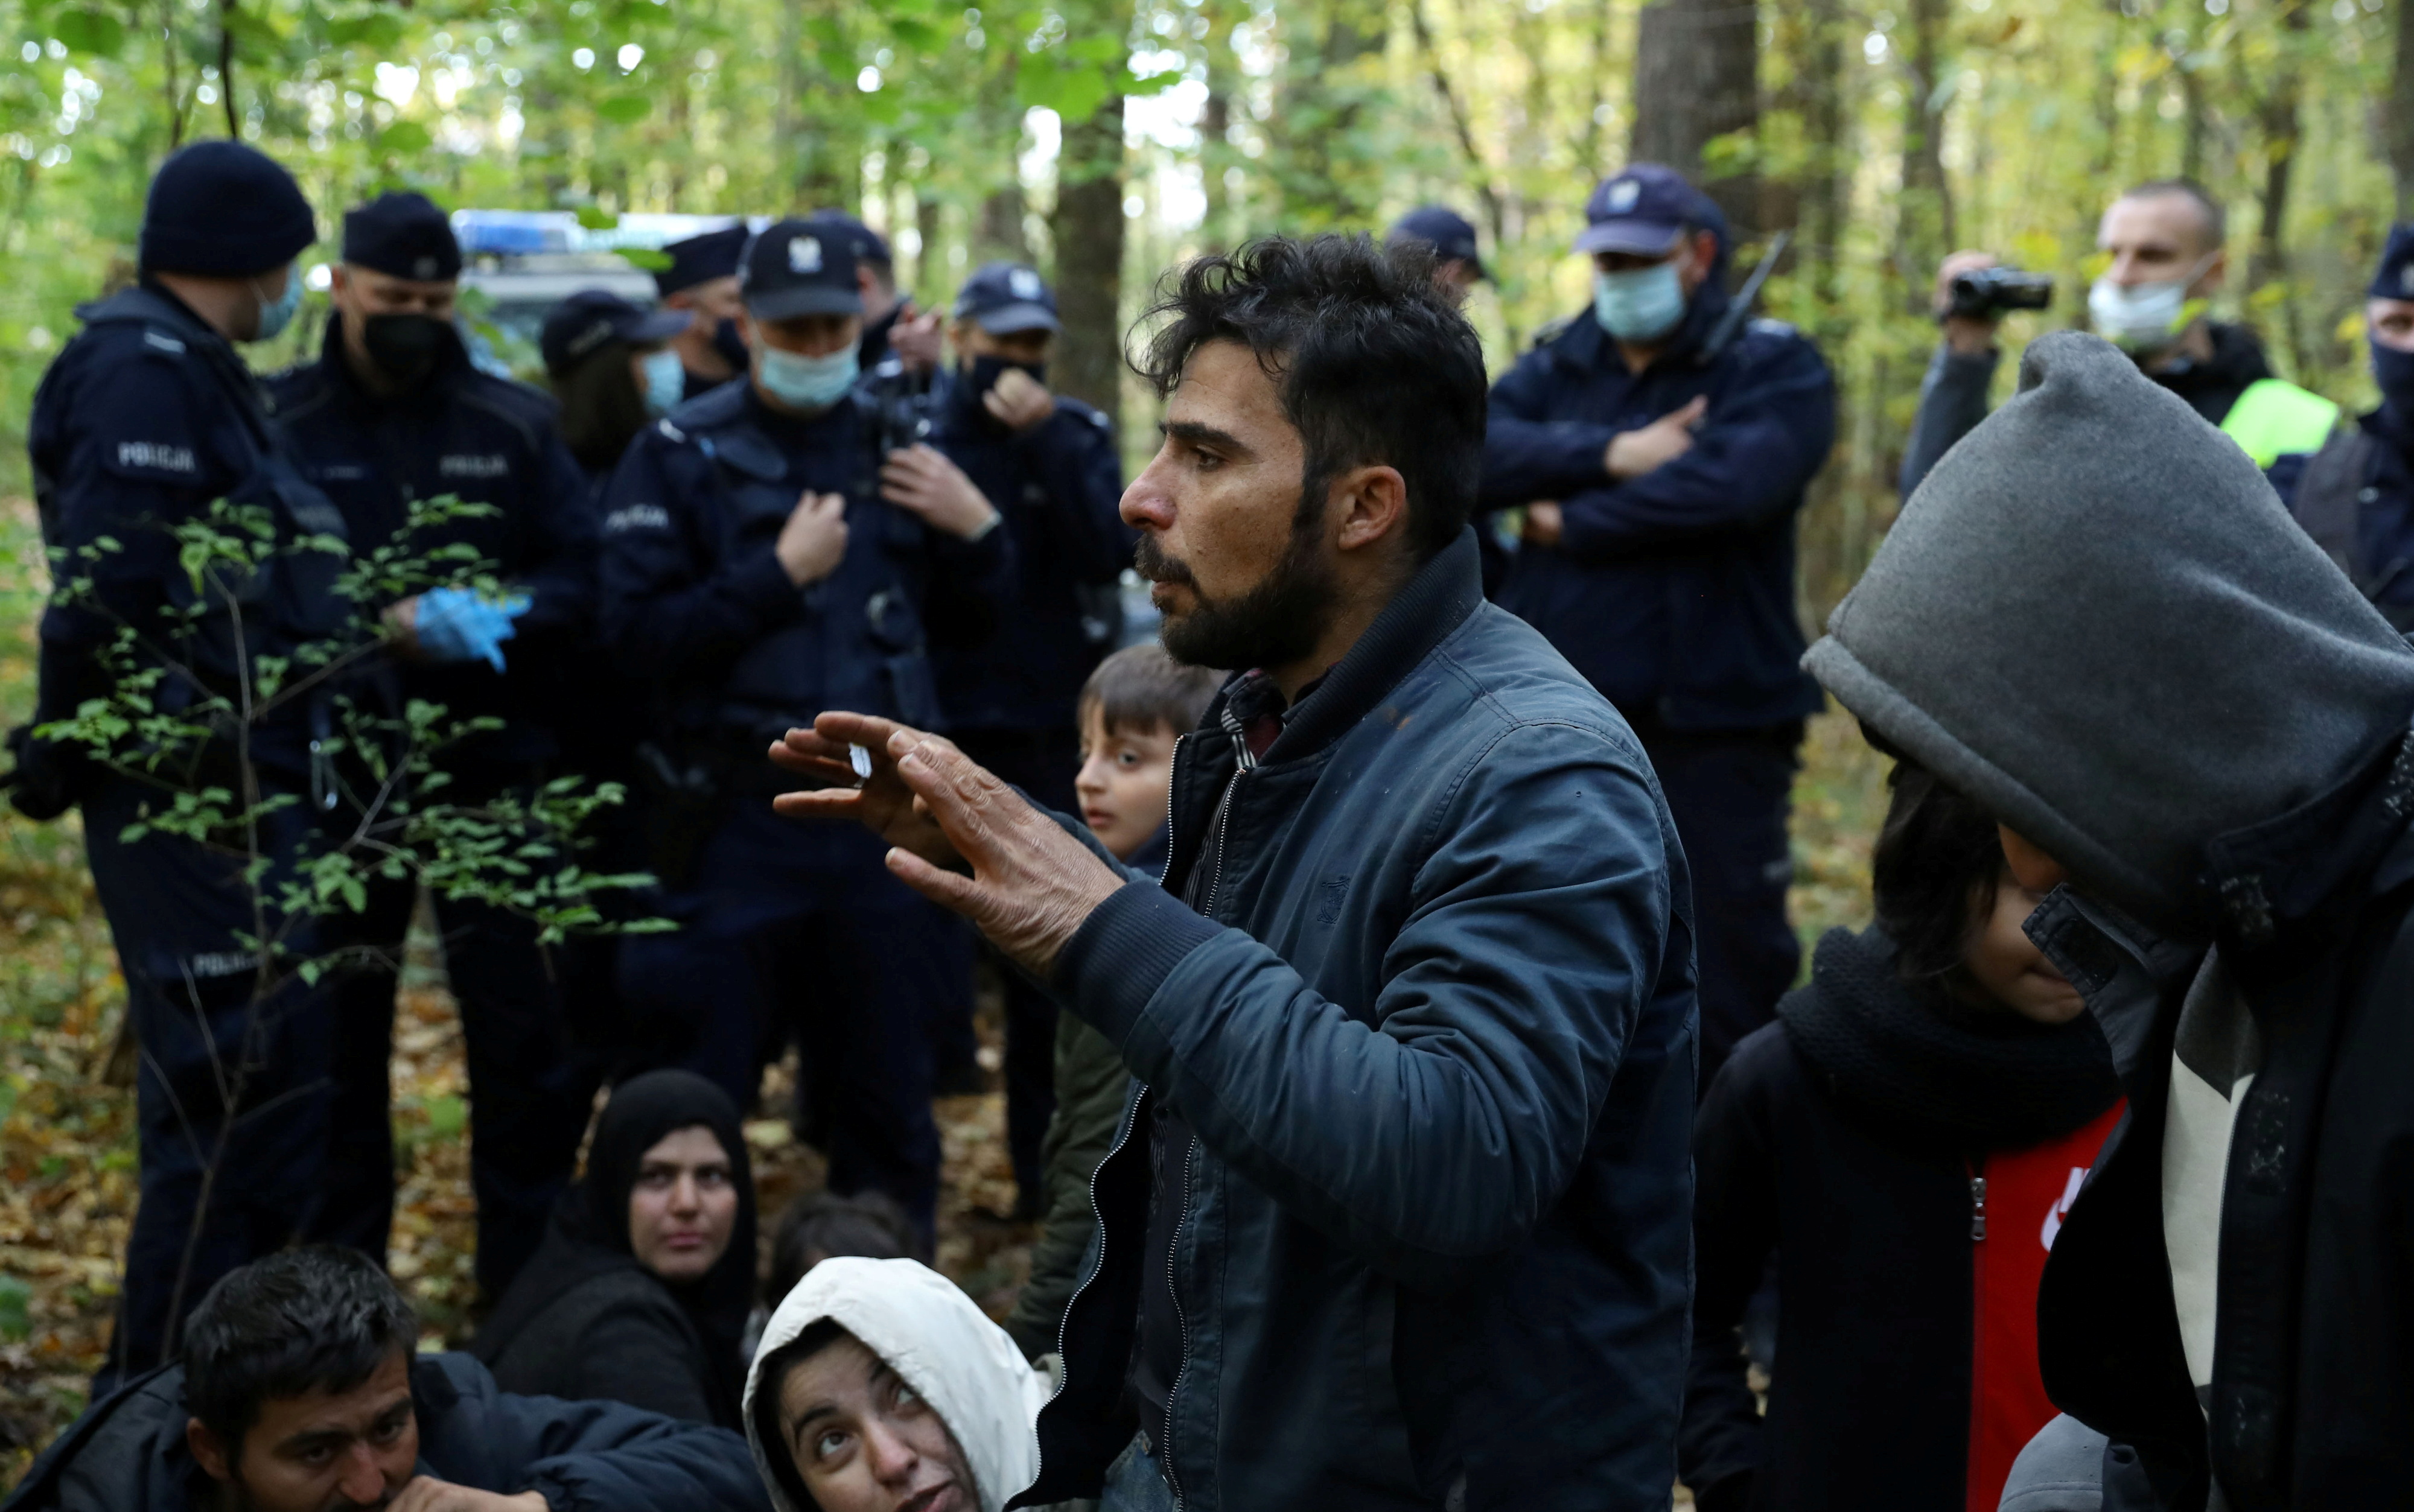 Iraqi migrants talk to NGO Grupa Granica's representatives as they are surrounded by border guards and police officers after they crossed the Belarusian-Polish border during the ongoing migrant crisis, in Hajnowka